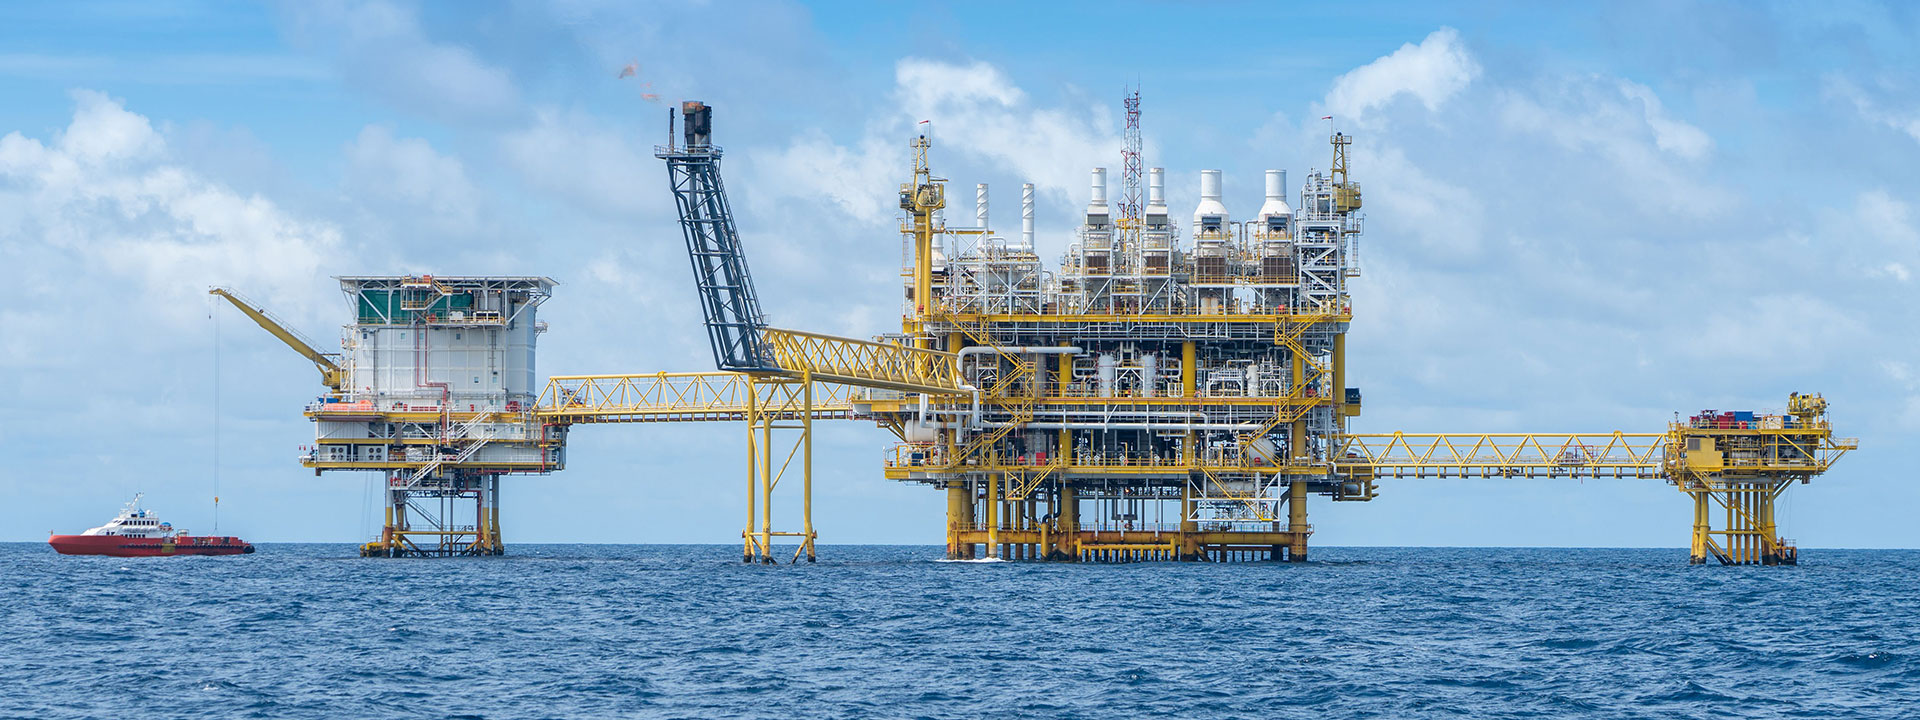 The type of offshore oil rig that might use BarCan barite API Drilling mud. Rig has no identifying features – its yellow structure is shown on a bright, sunny day in the middle of the ocean. A platform supply vessel in the picture gives a sense of how immense the oil rig is.